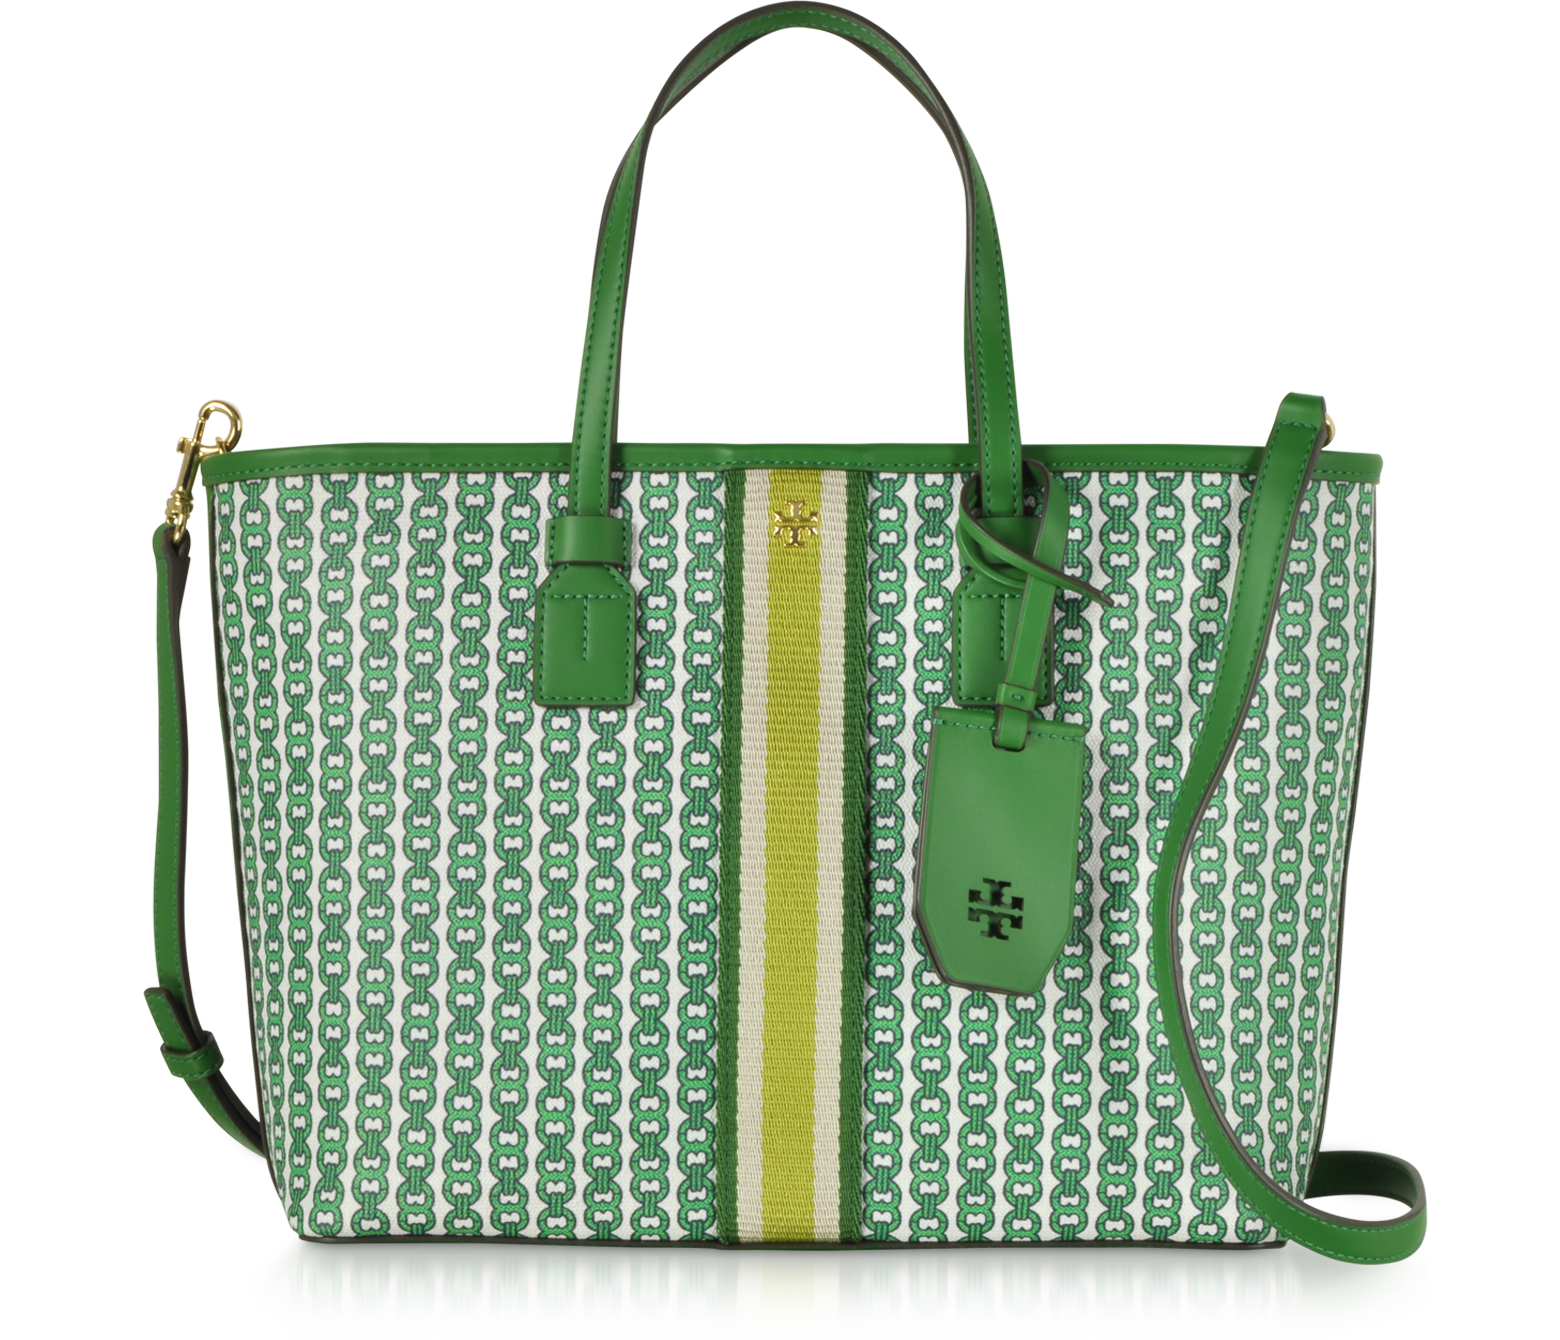 Tory Burch Gemini Link Canvas Small Tote in Green